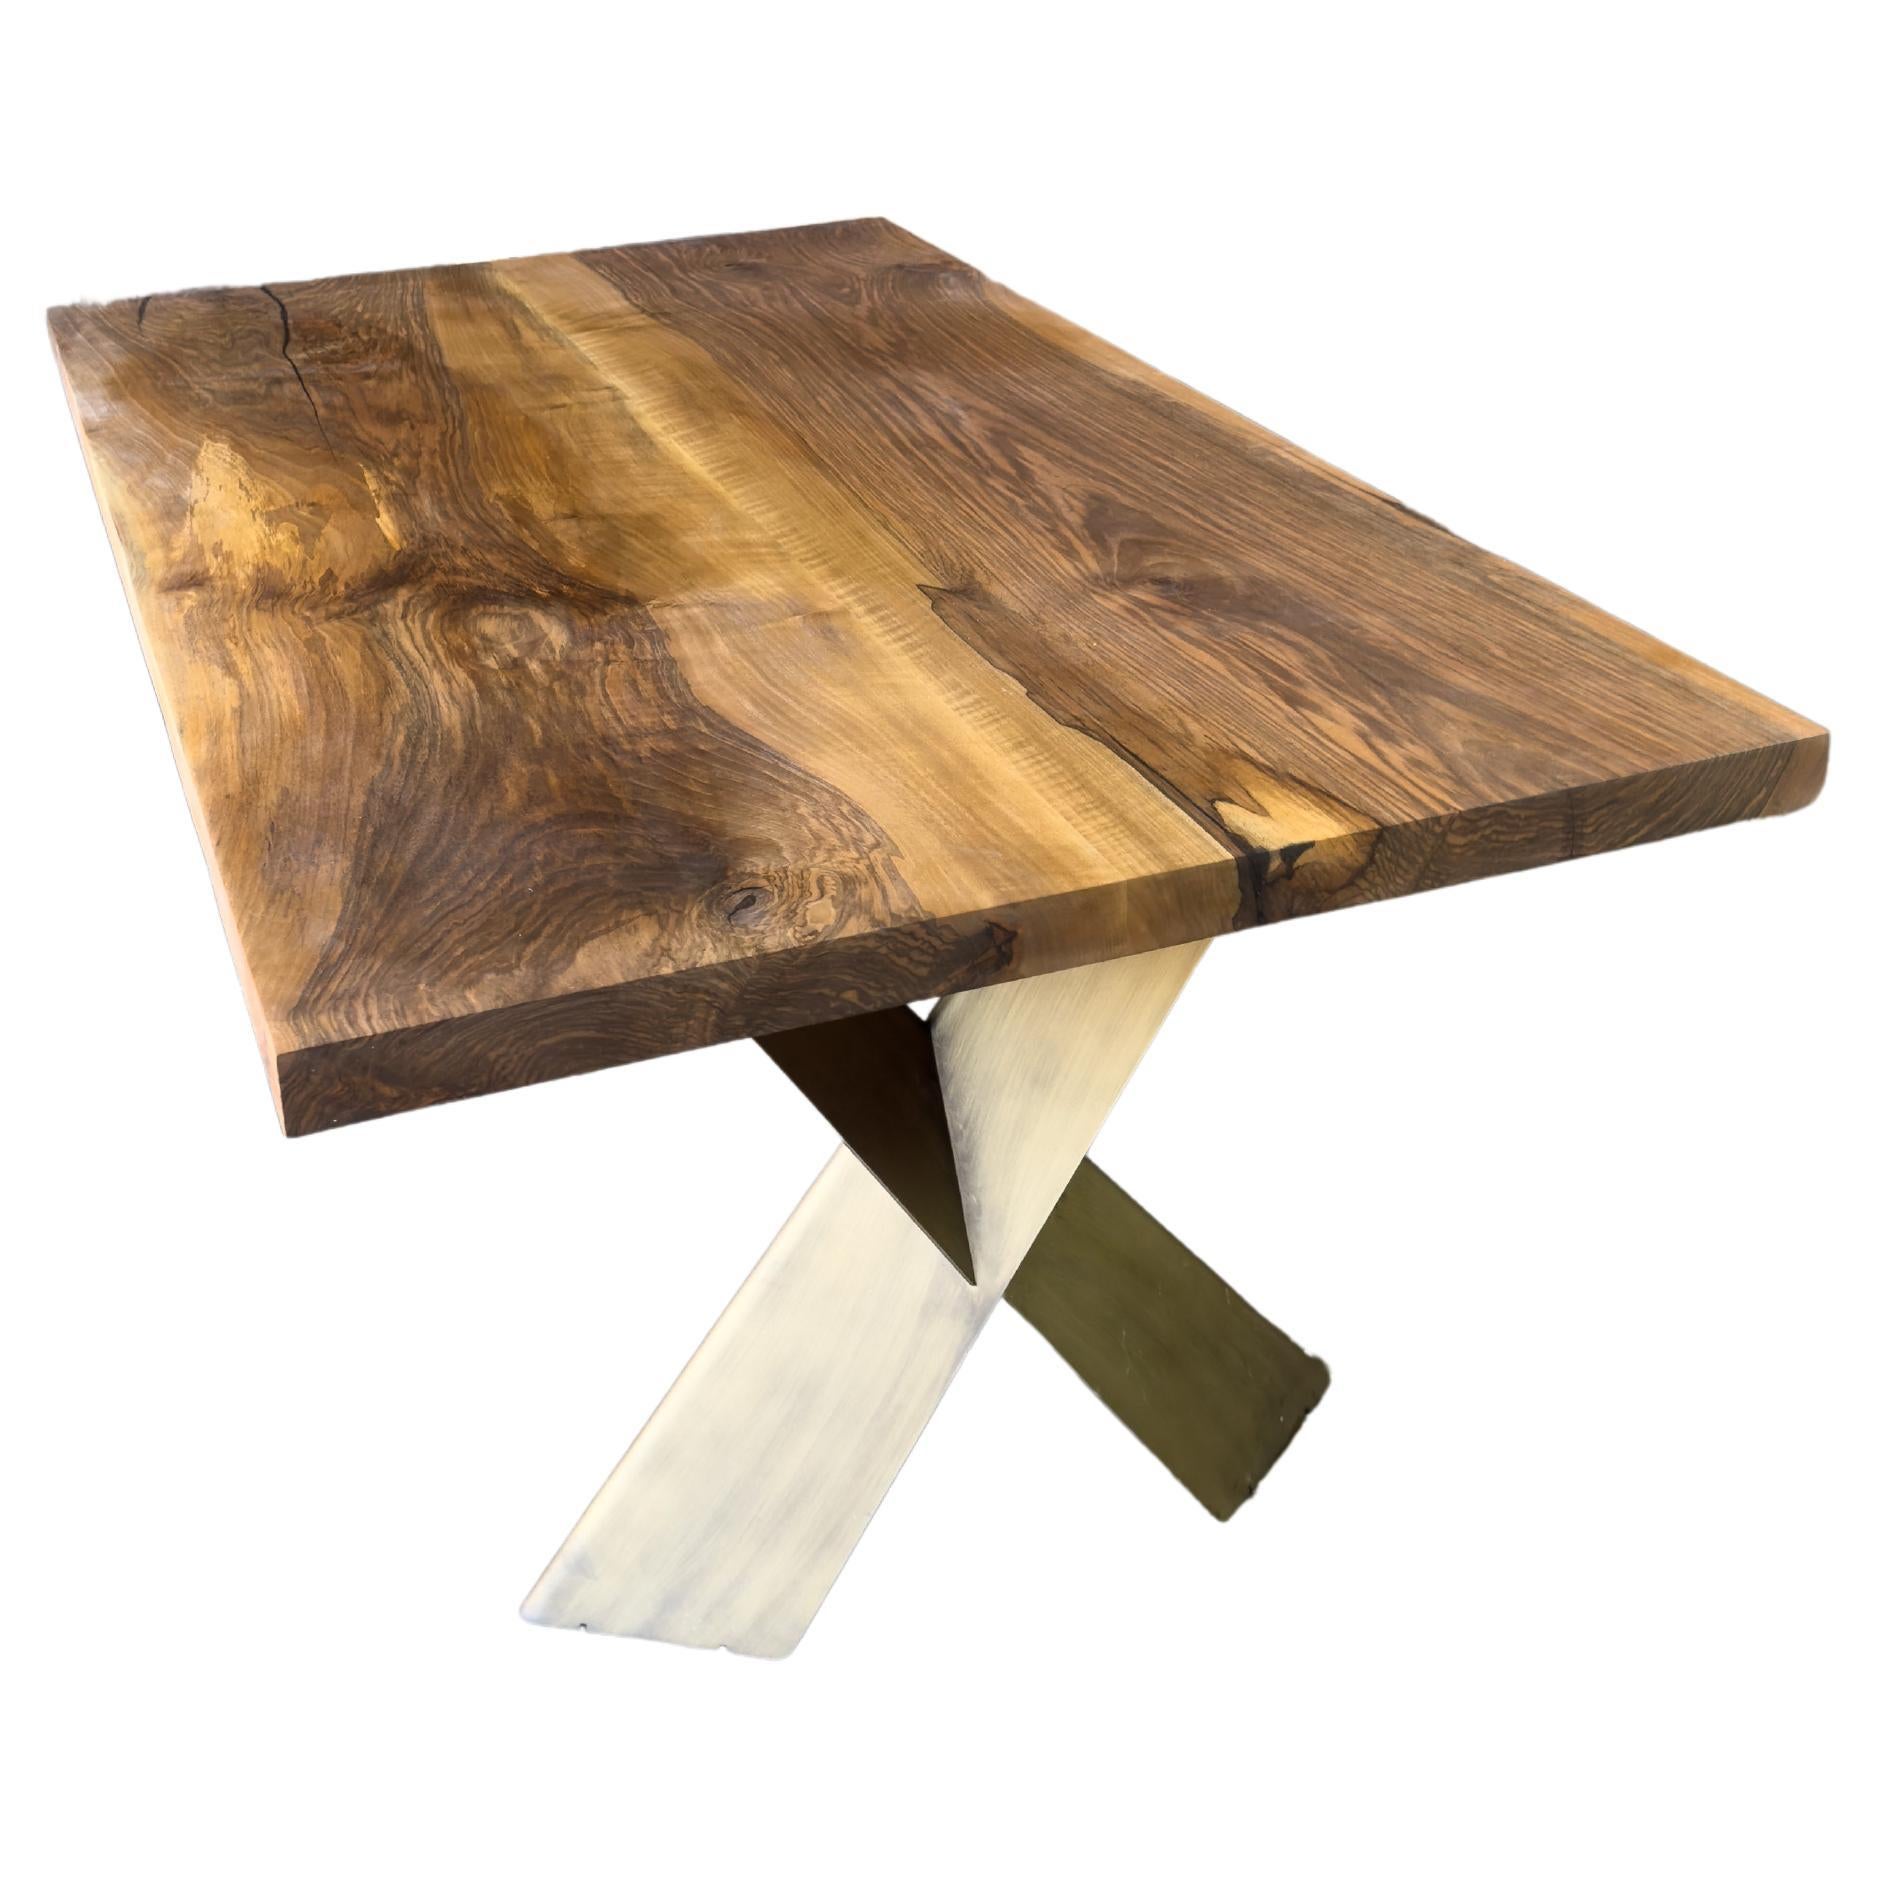 What is the best finish for a live edge table?